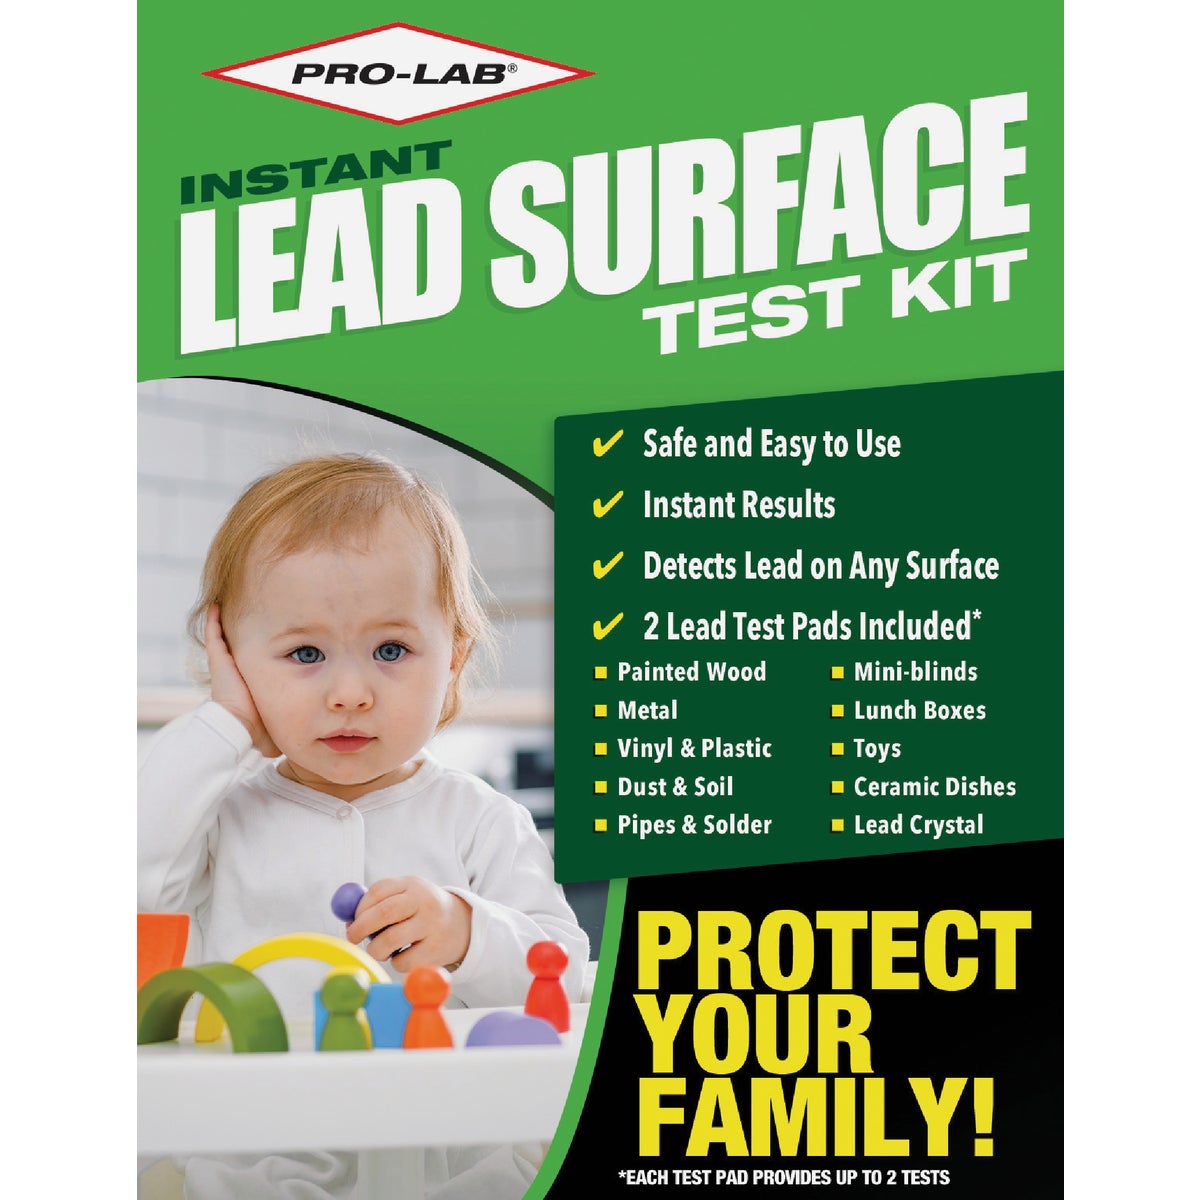 Item 426168, Simple to use do-it-yourself test kit detects poisonous lead on any surface